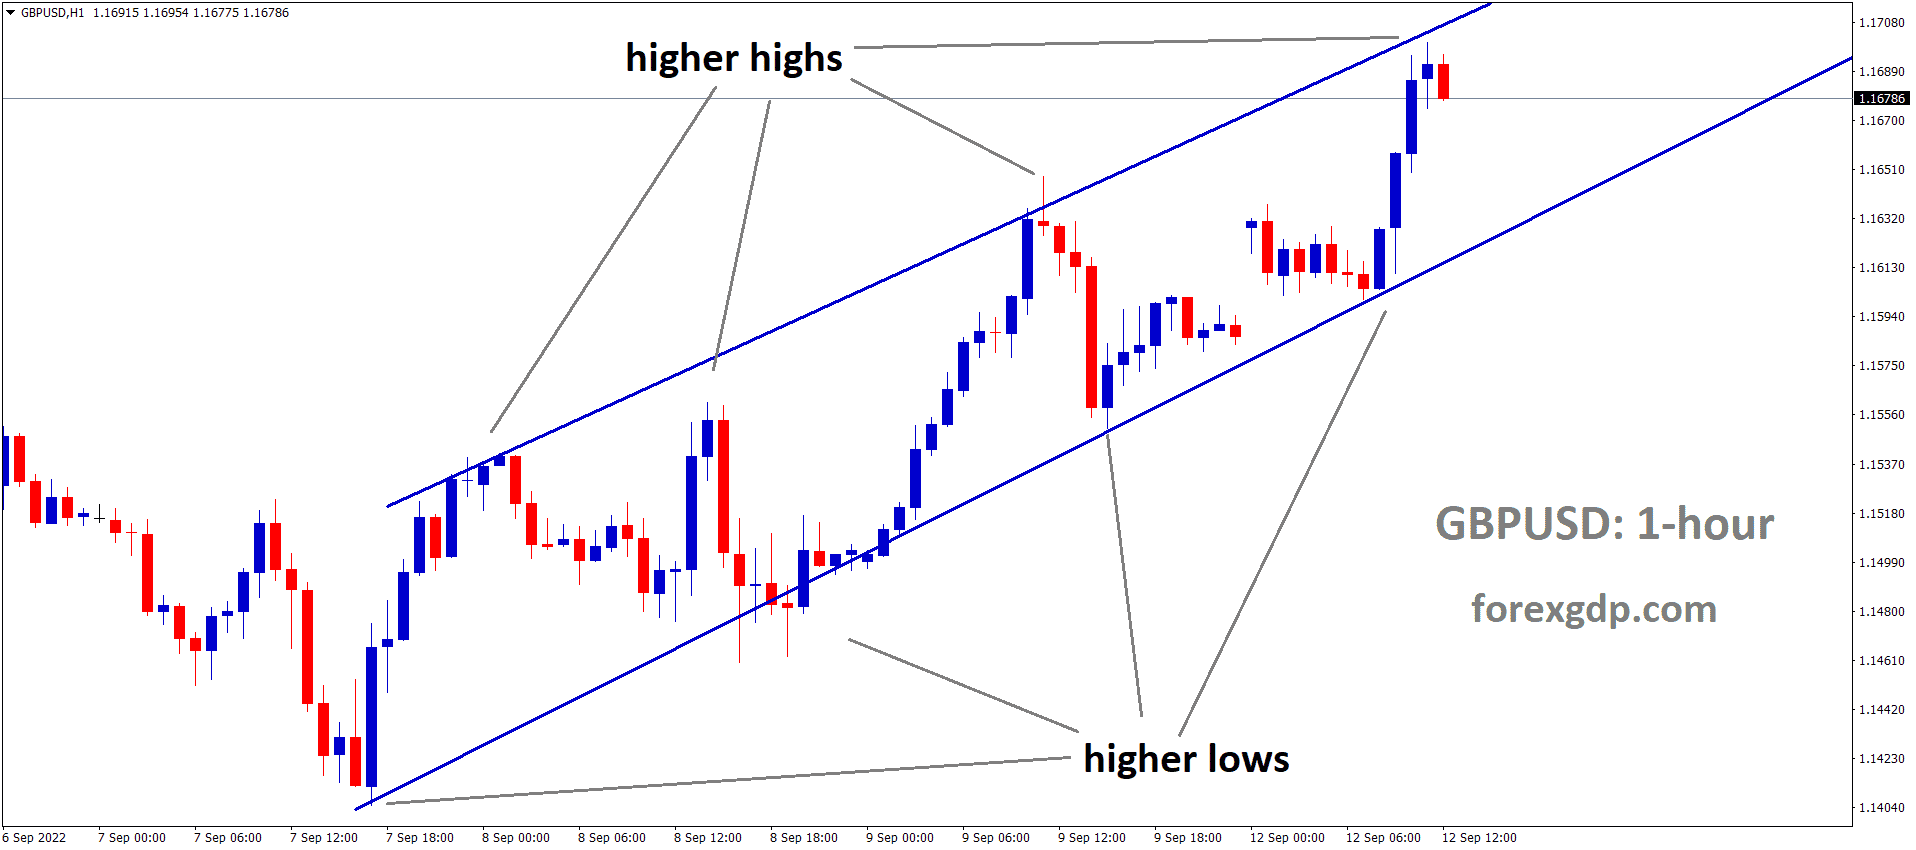 GBPUSD is moving in an Ascending channel and the market has fallen from the higher high area of the channel